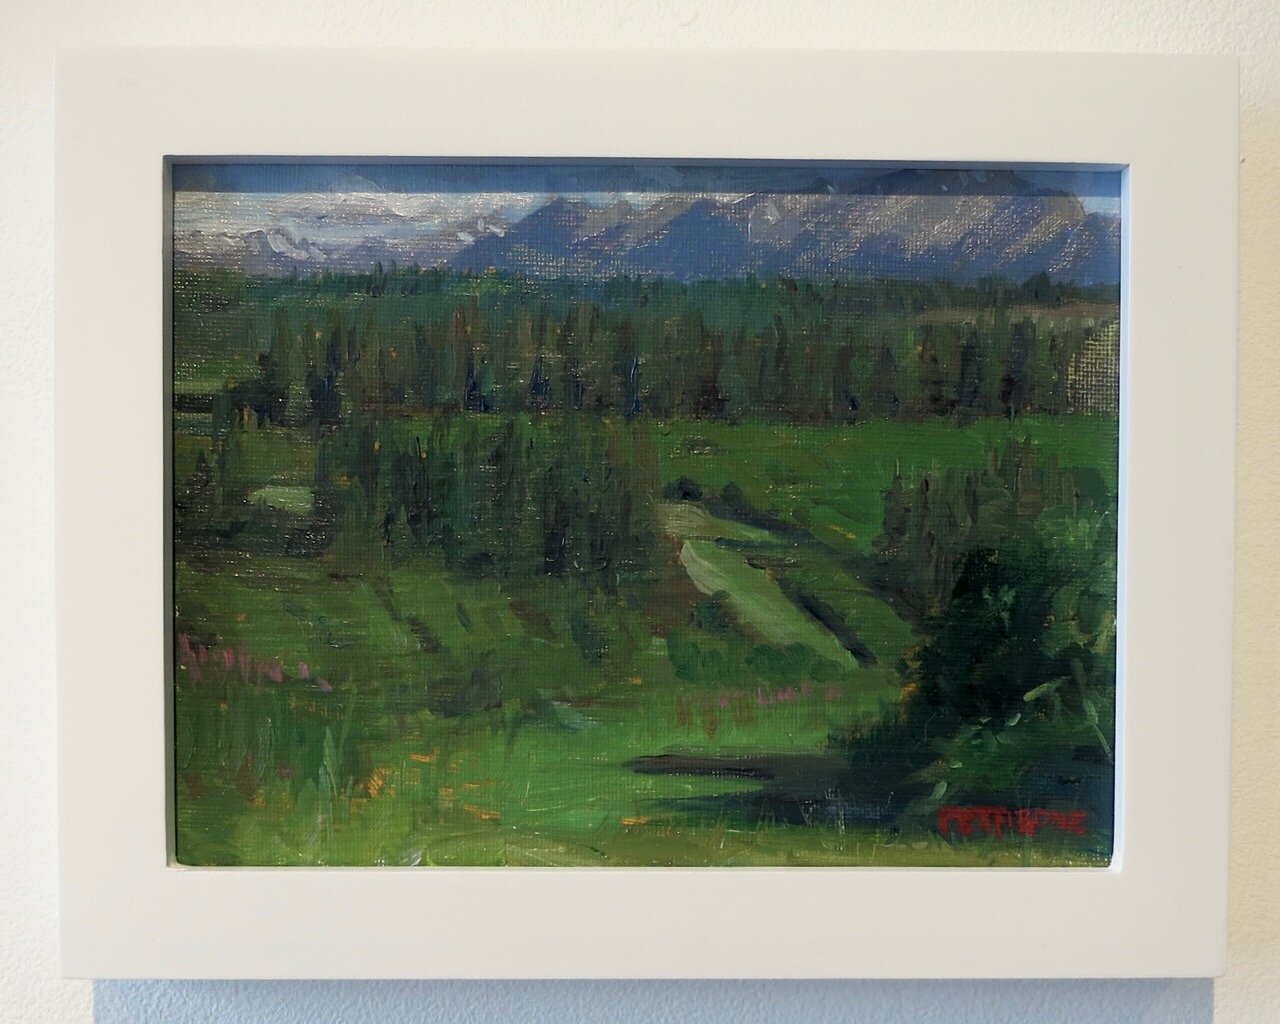    View From Lookout Mountain Trail , 2020   Oil on canvas  6x8 inches 